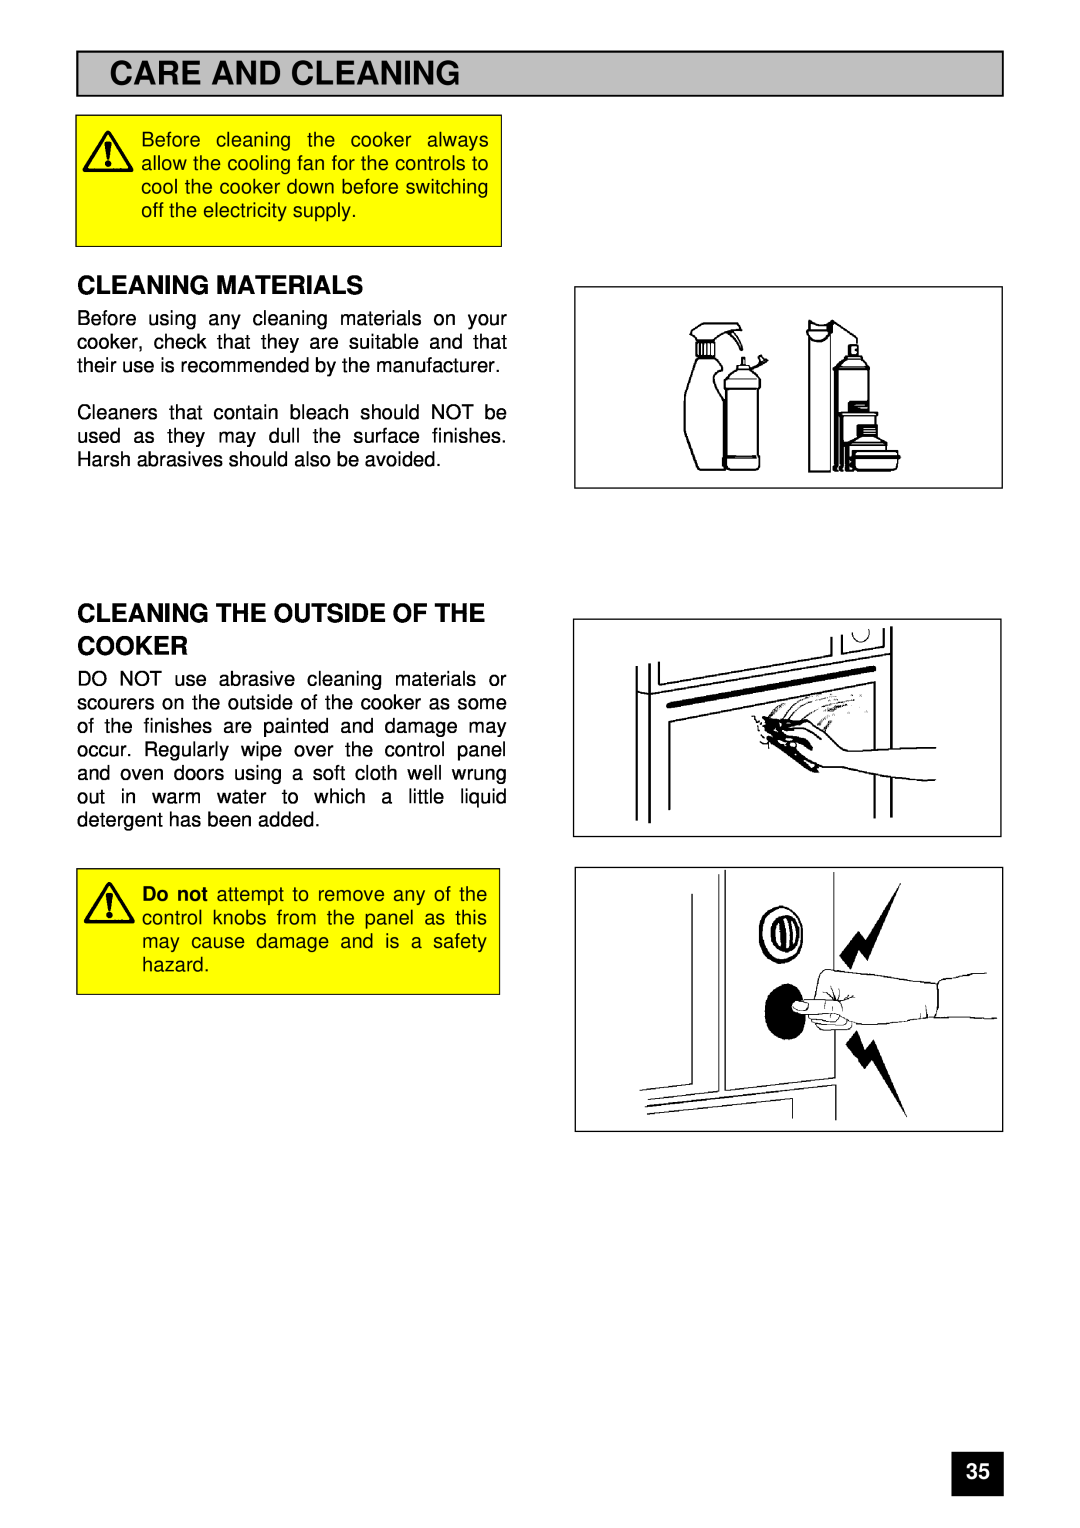 Tricity Bendix E 750 installation instructions Care And Cleaning, Cleaning Materials, Cleaning The Outside Of The Cooker 